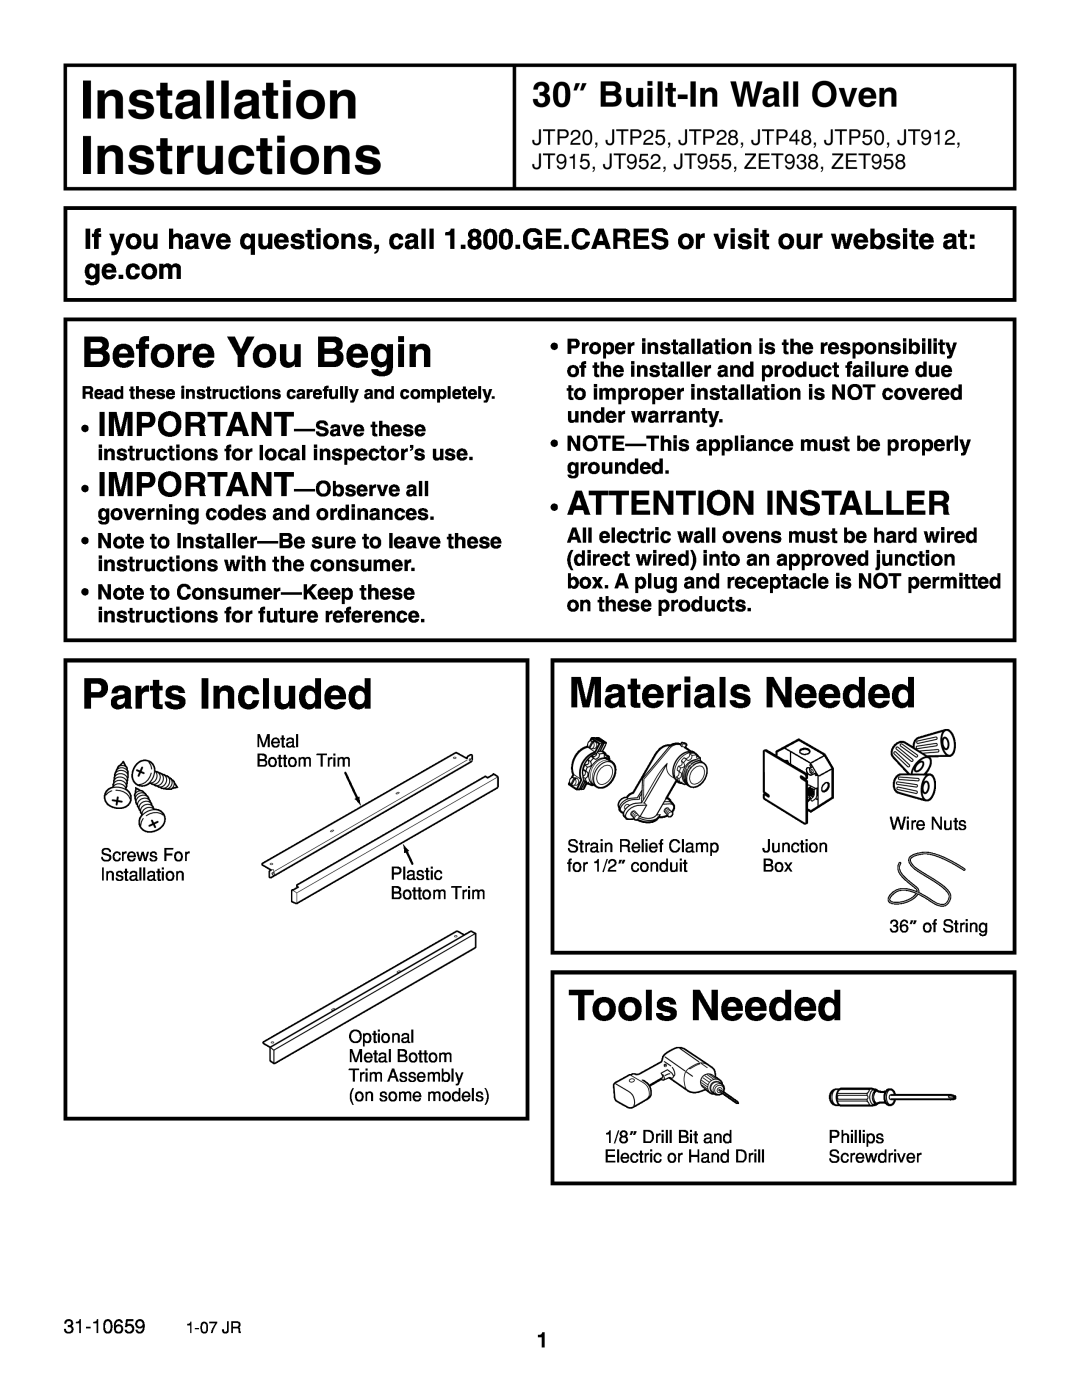 GE JTP20 installation instructions Installation, Instructions, Before You Begin, Parts Included, Materials Needed 